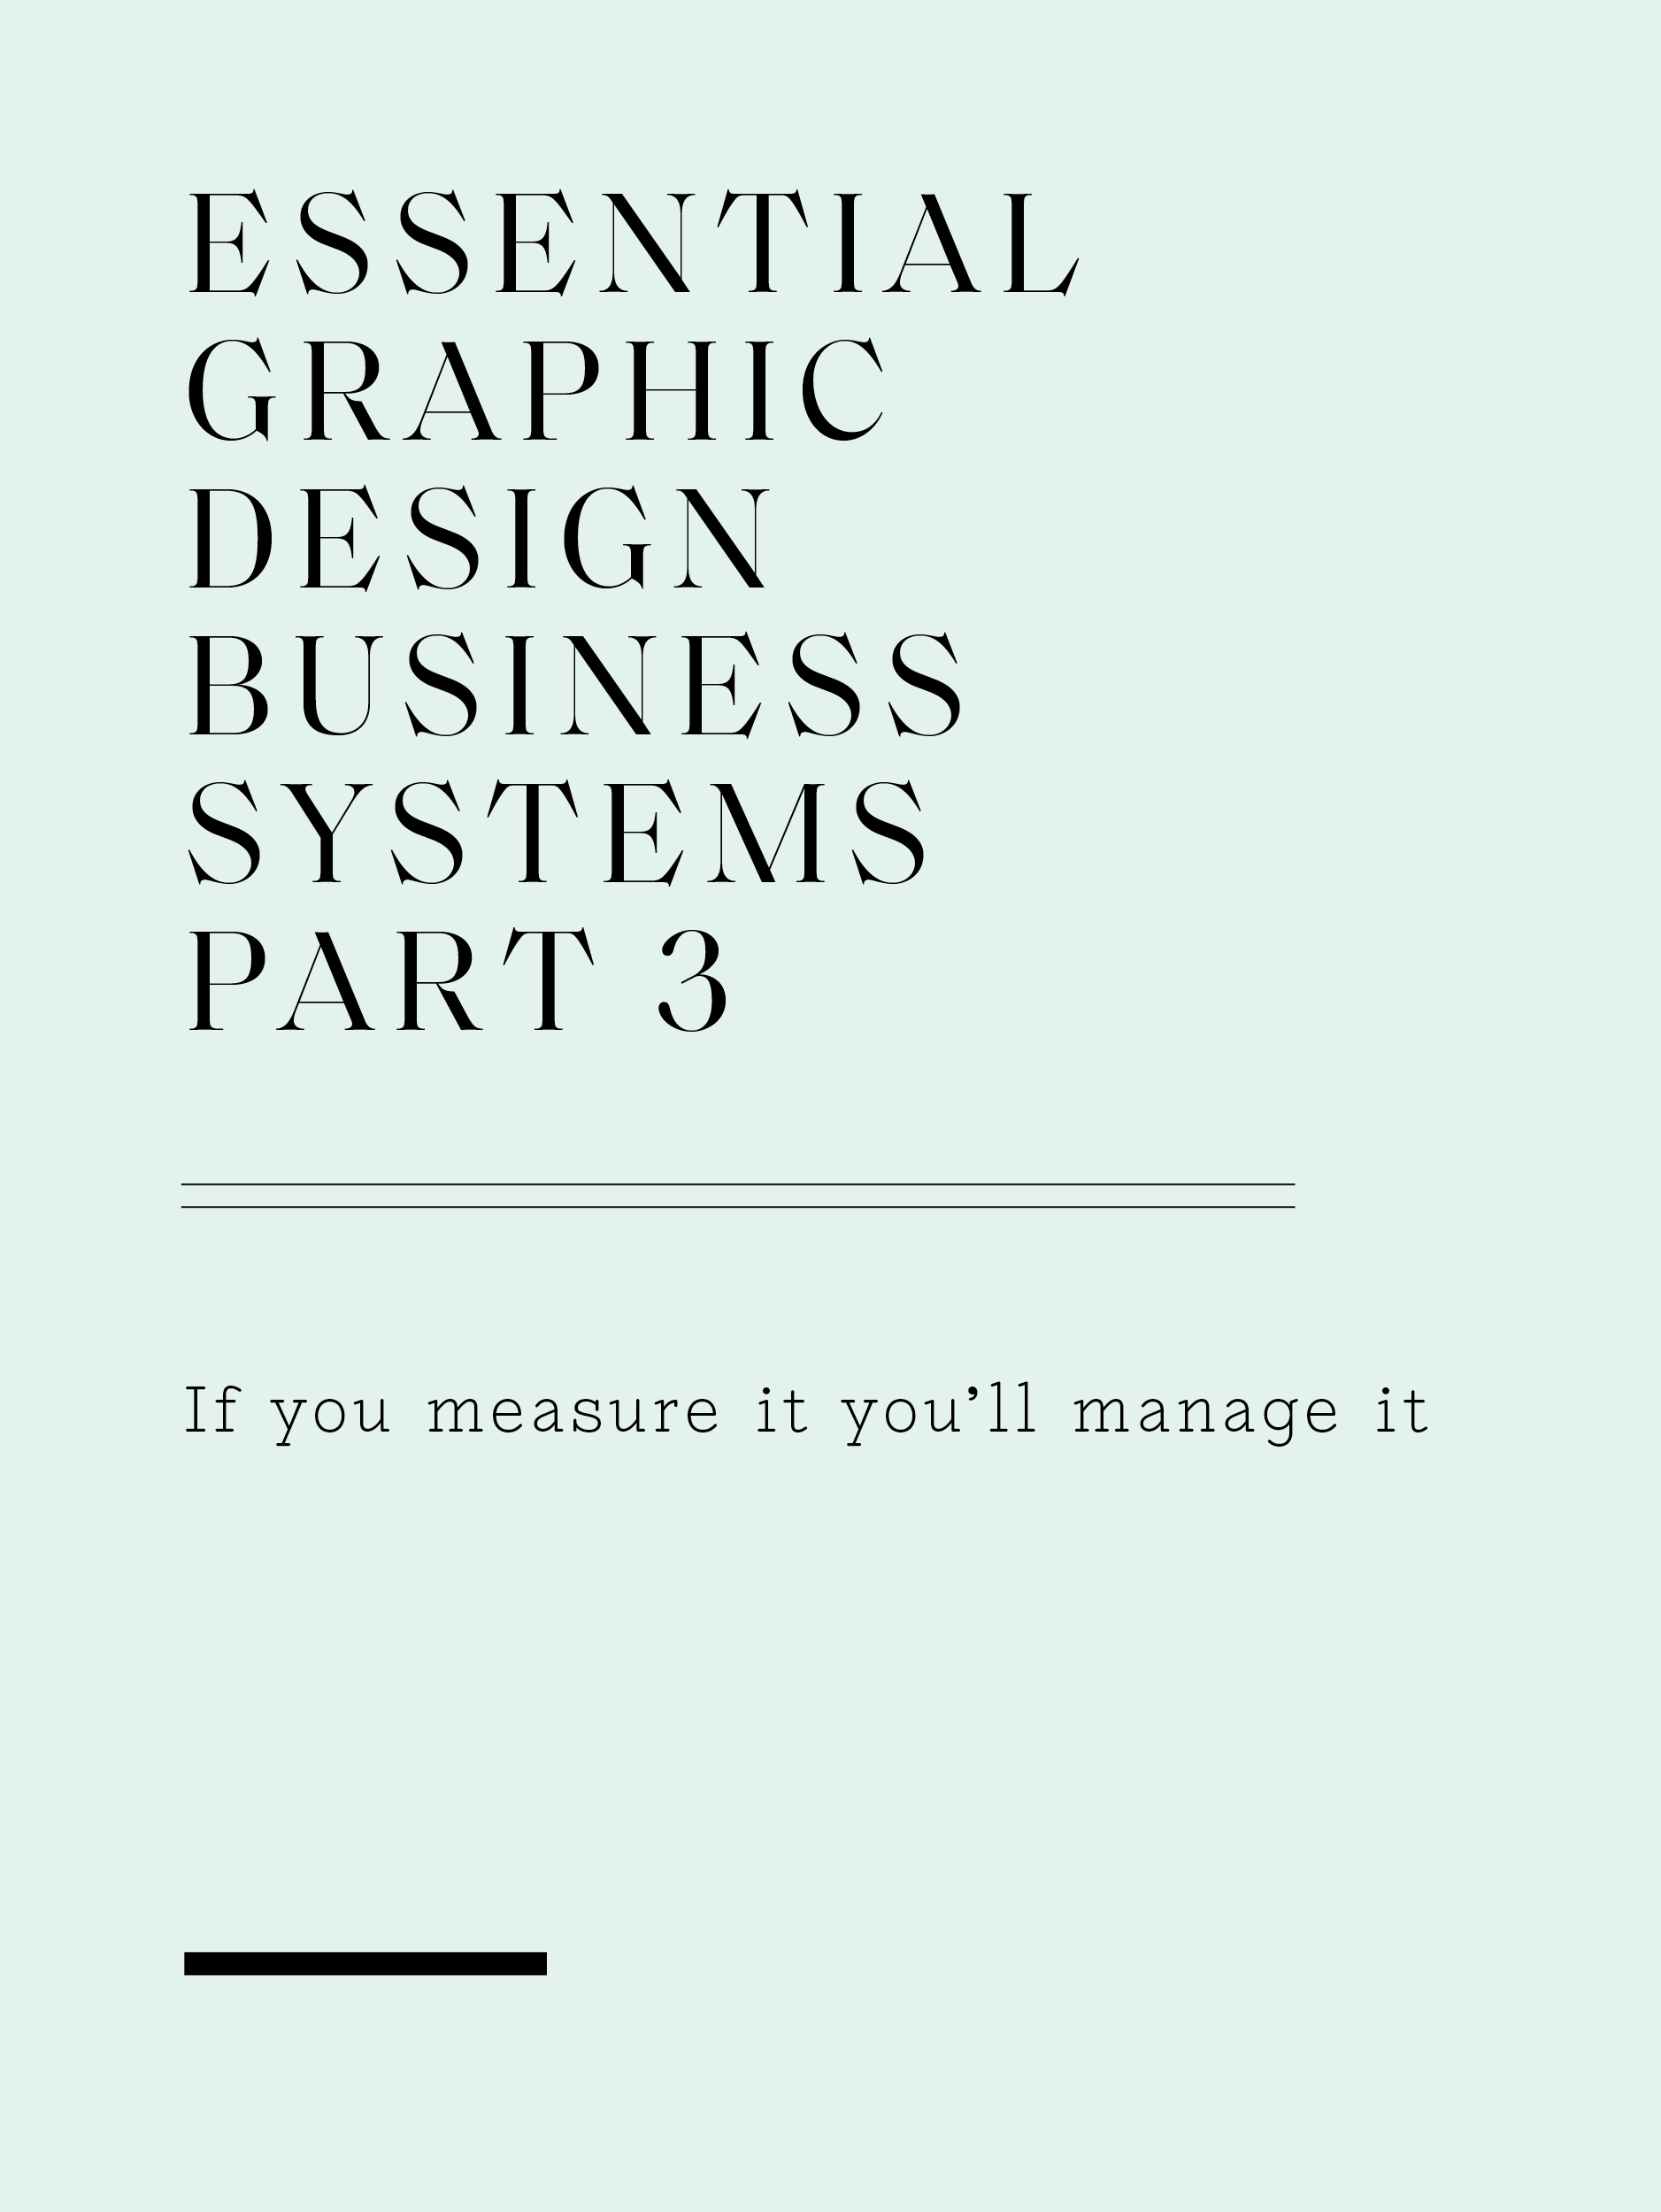 Essential Graphic Design Business Systems Part 3